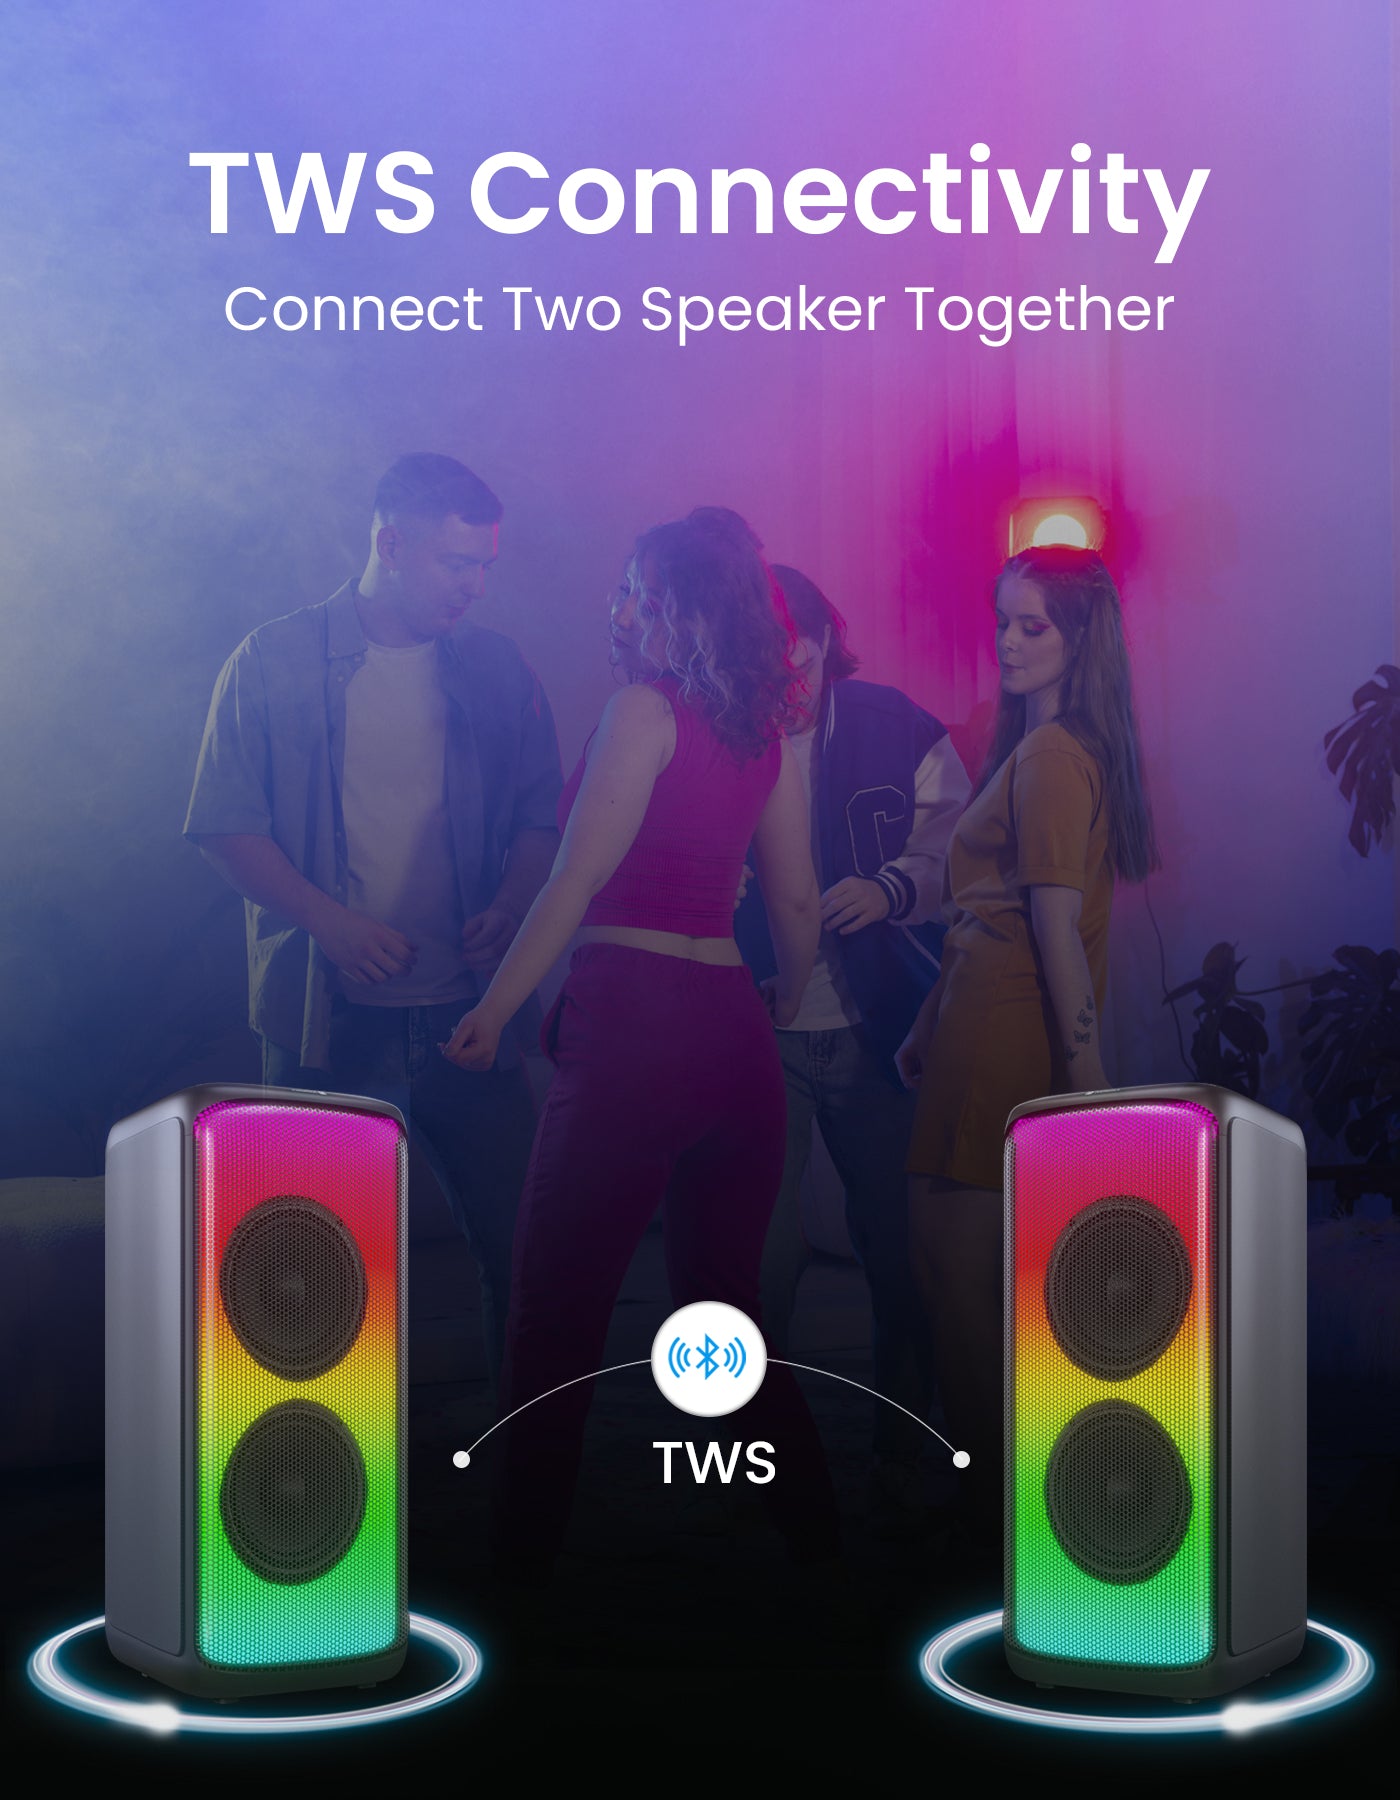 Portronics Iron Beats portable party speaker | Bluetooth party speaker with tws connectivity| 250w party speaker| wireless party speaker| Portable wireless Speaker| TWS Speaker